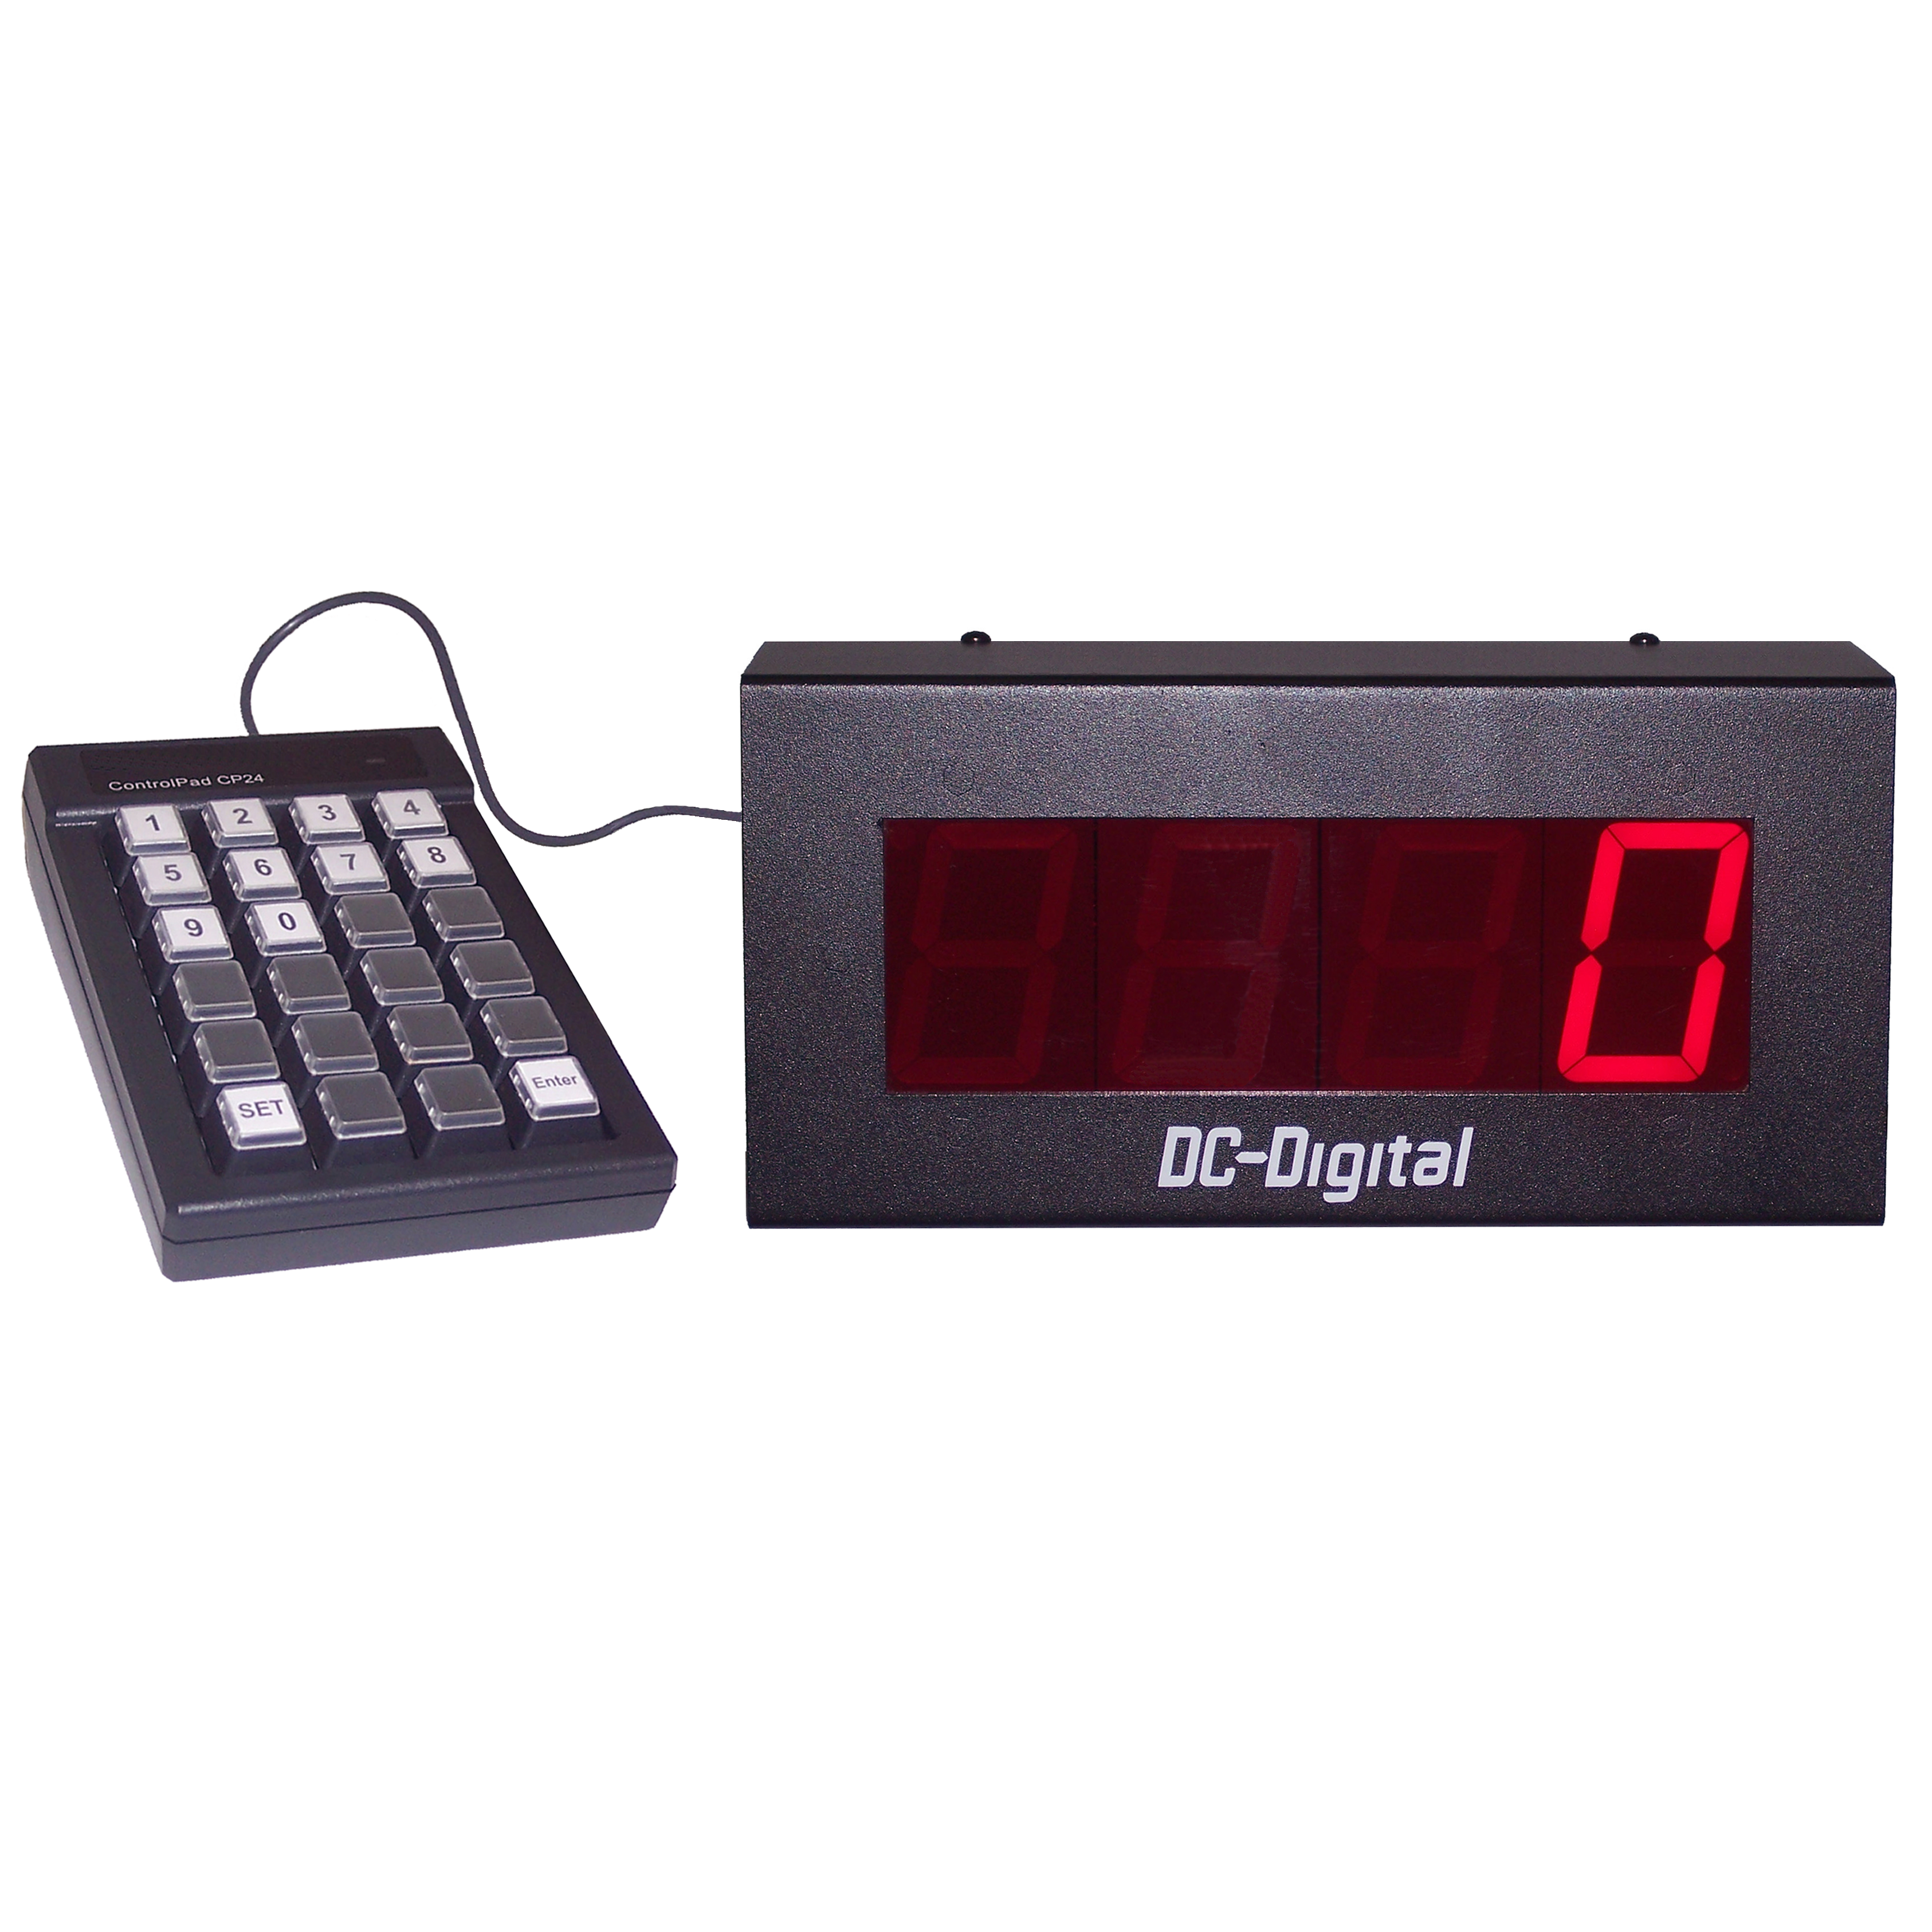 (DC-25-Static-Key) 2.3 Inch LED Digital, Wired Remote Keypad Controlled, Static Number Display